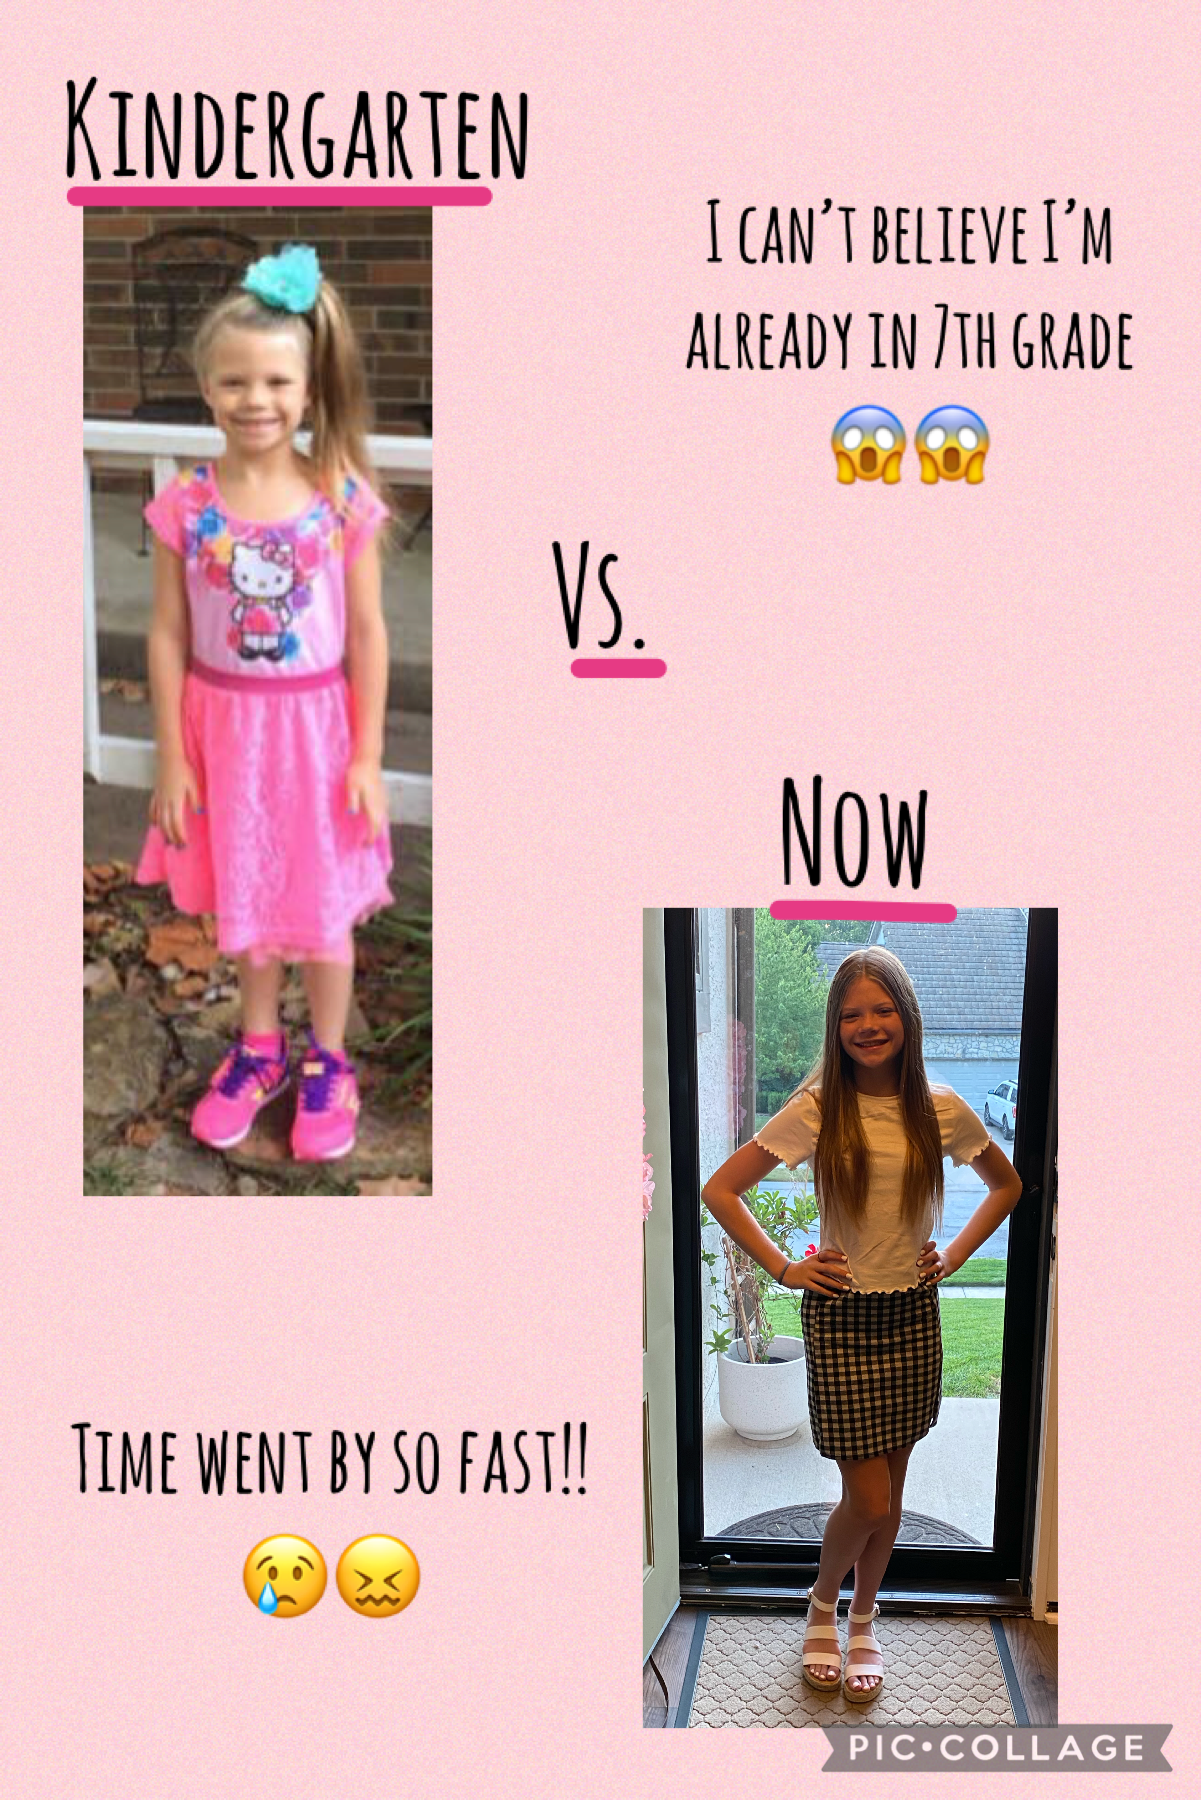 💗TAP💗
I can’t believe I’m already in 7th grade! 
Time has flown by I remember kindergarten like it was yesterday! 😢